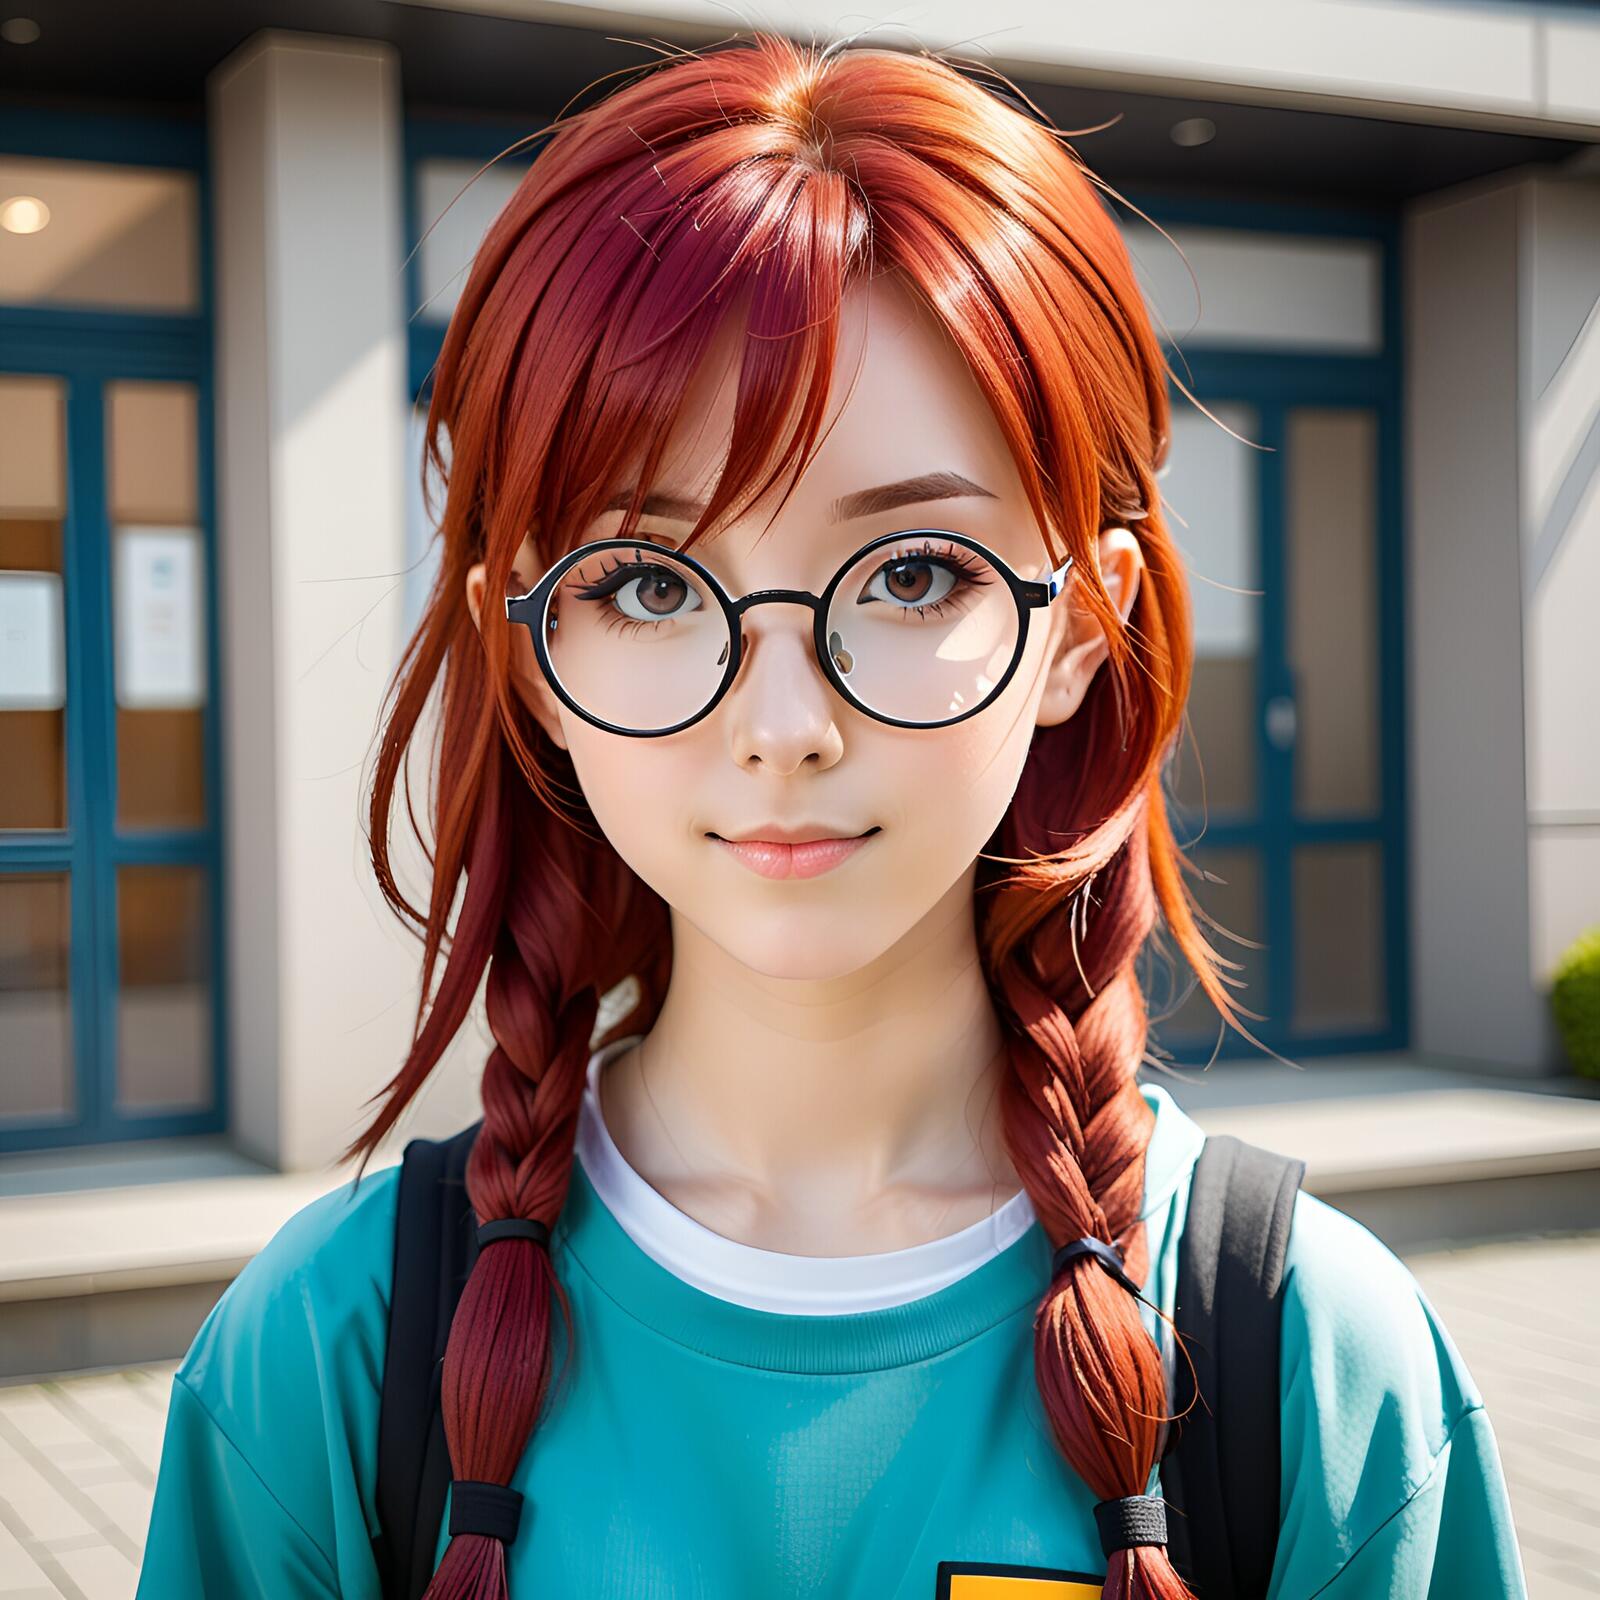 Free photo Girl with pigtails